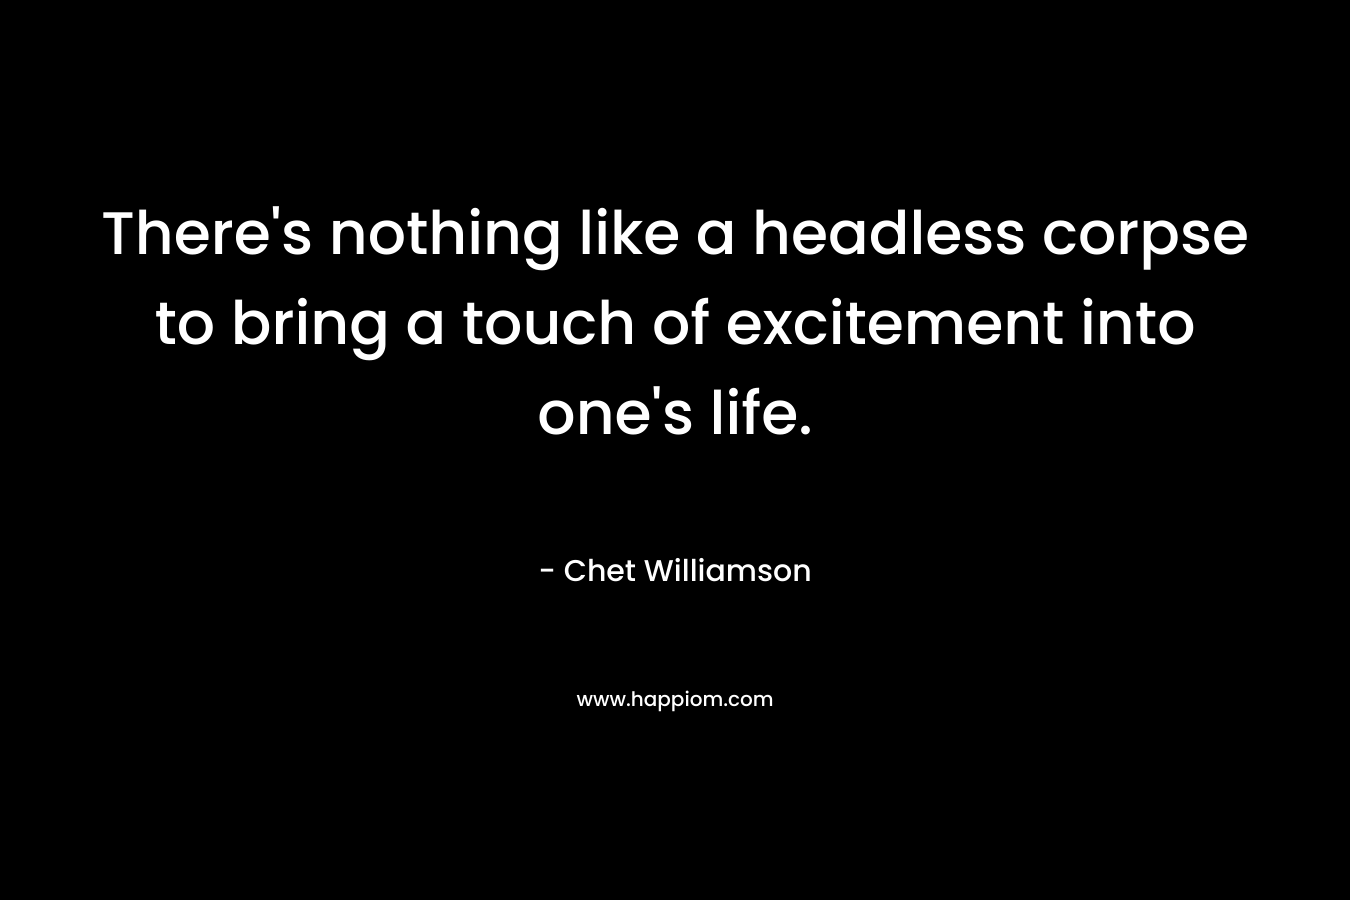 There’s nothing like a headless corpse to bring a touch of excitement into one’s life. – Chet Williamson